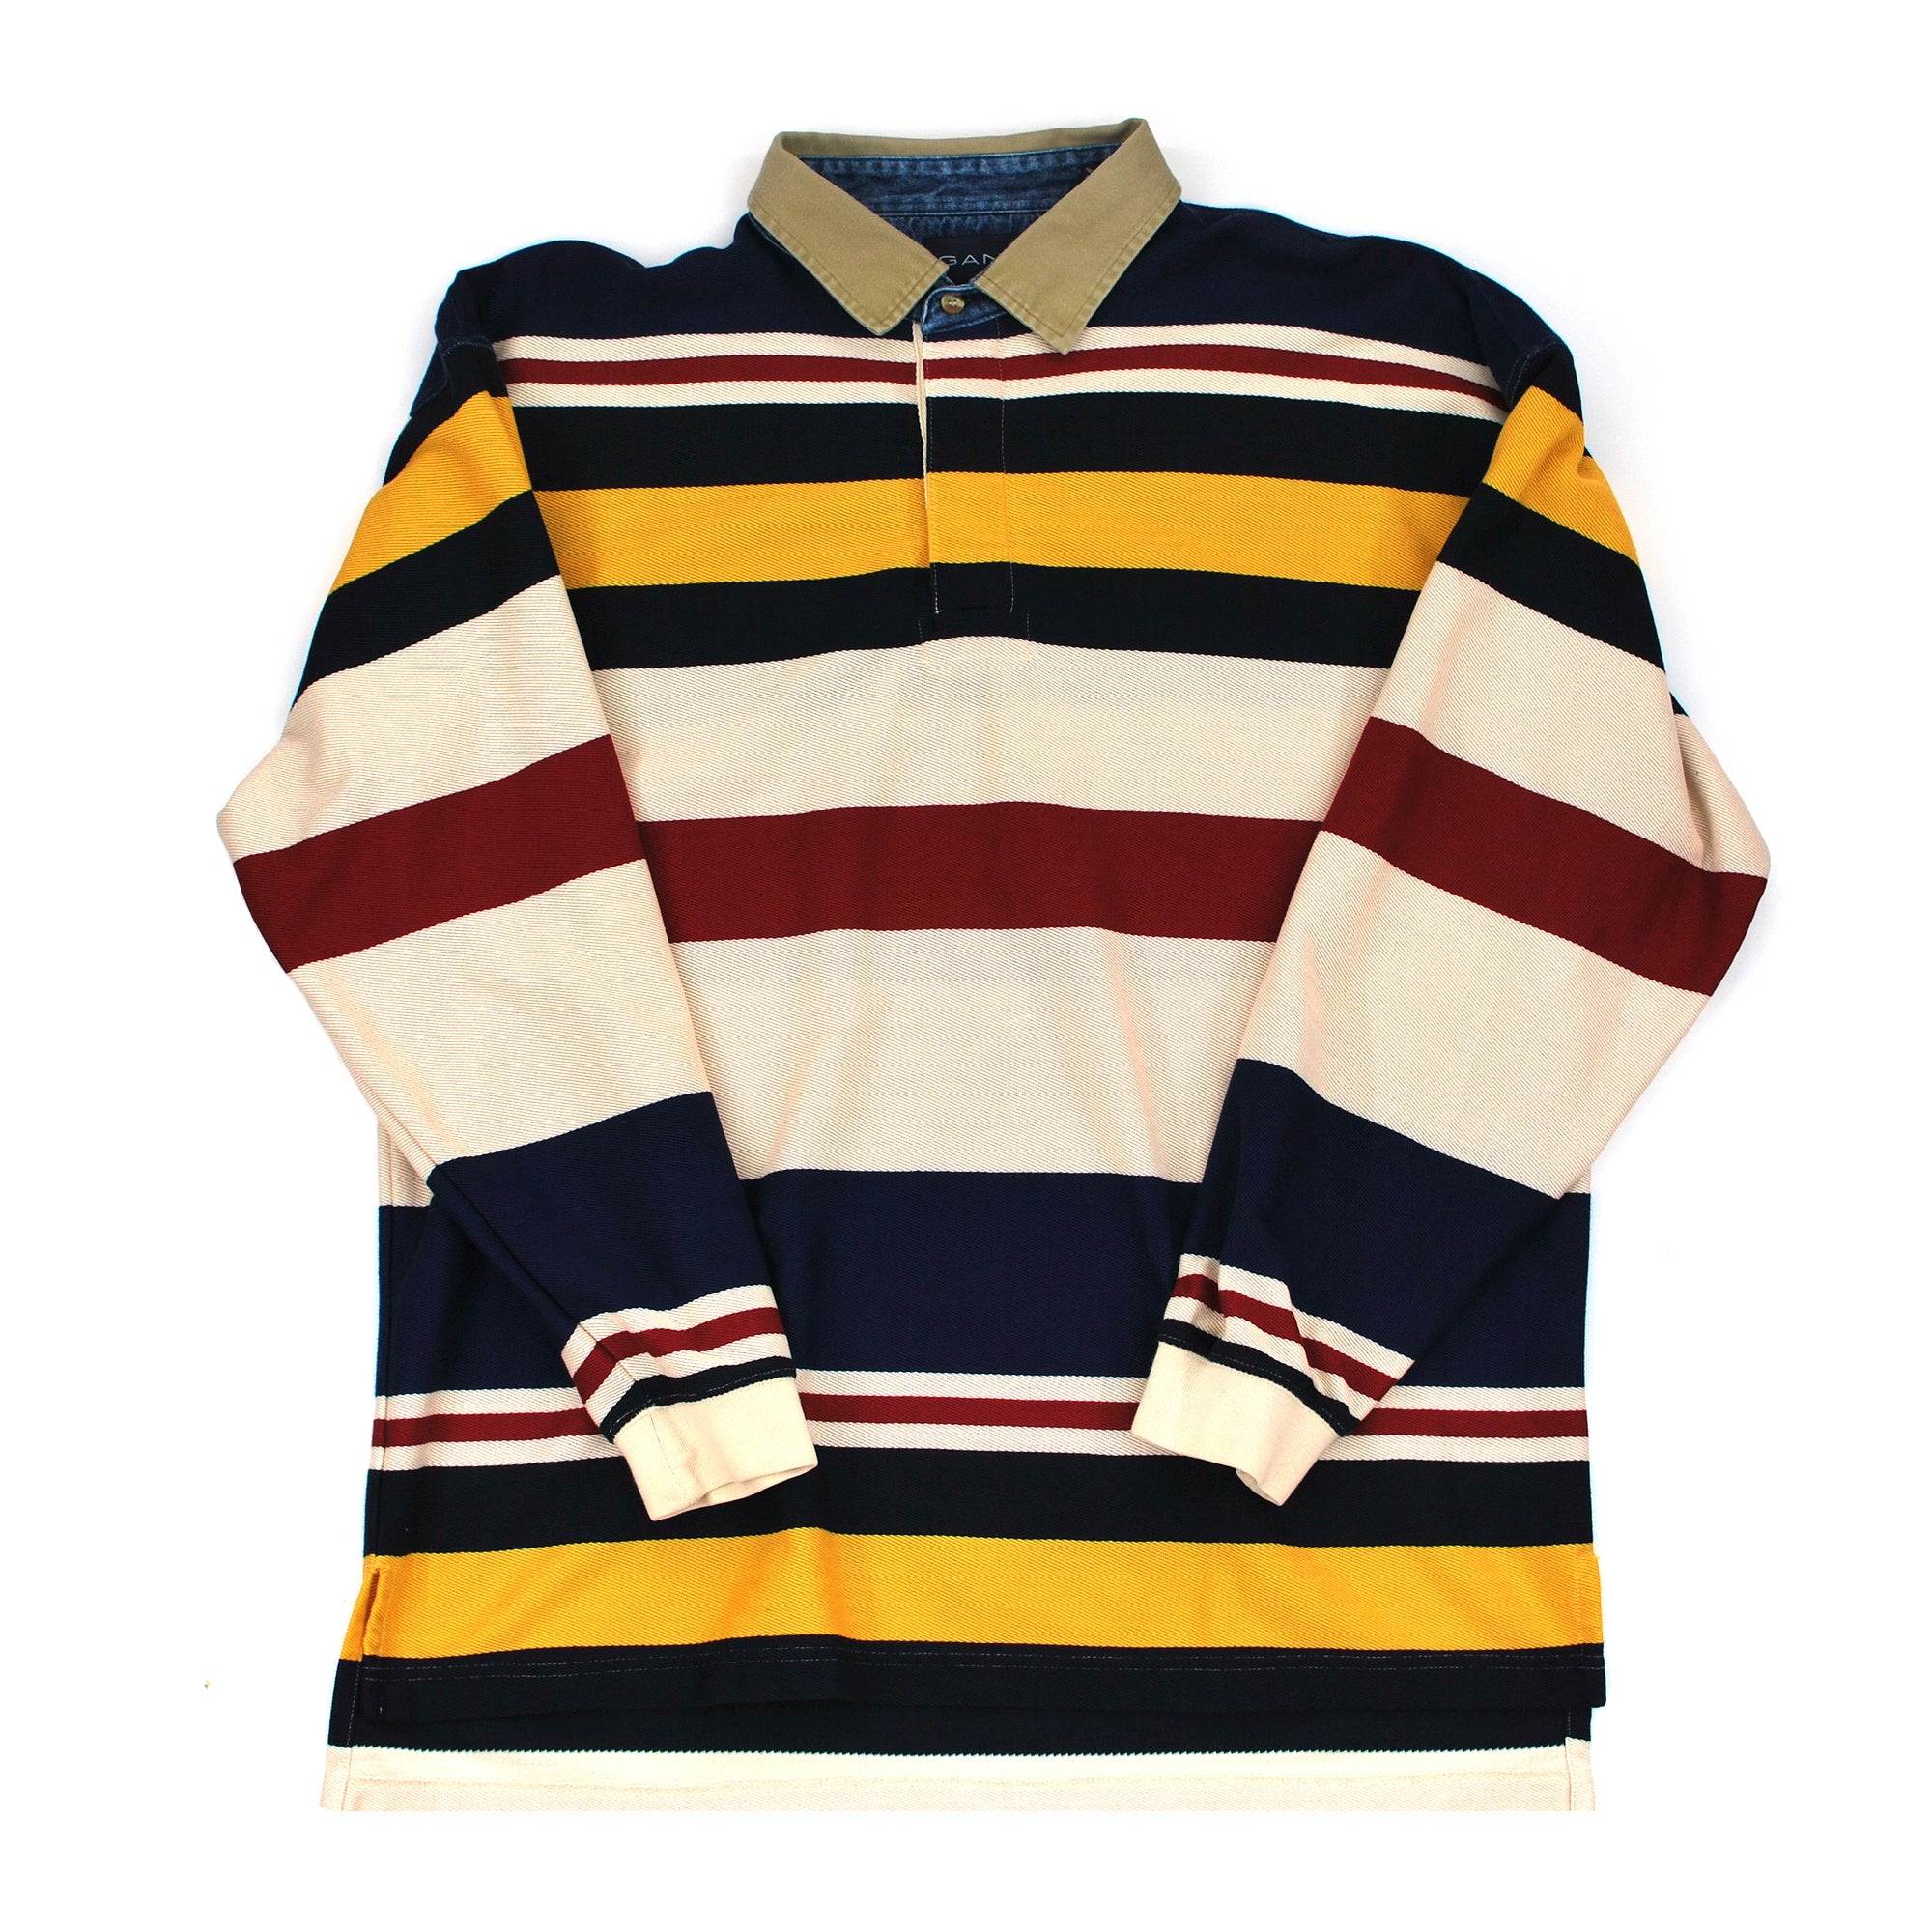 theorie AIDS bed Vintage Gant Rugby Shirt – Dimensions 3000